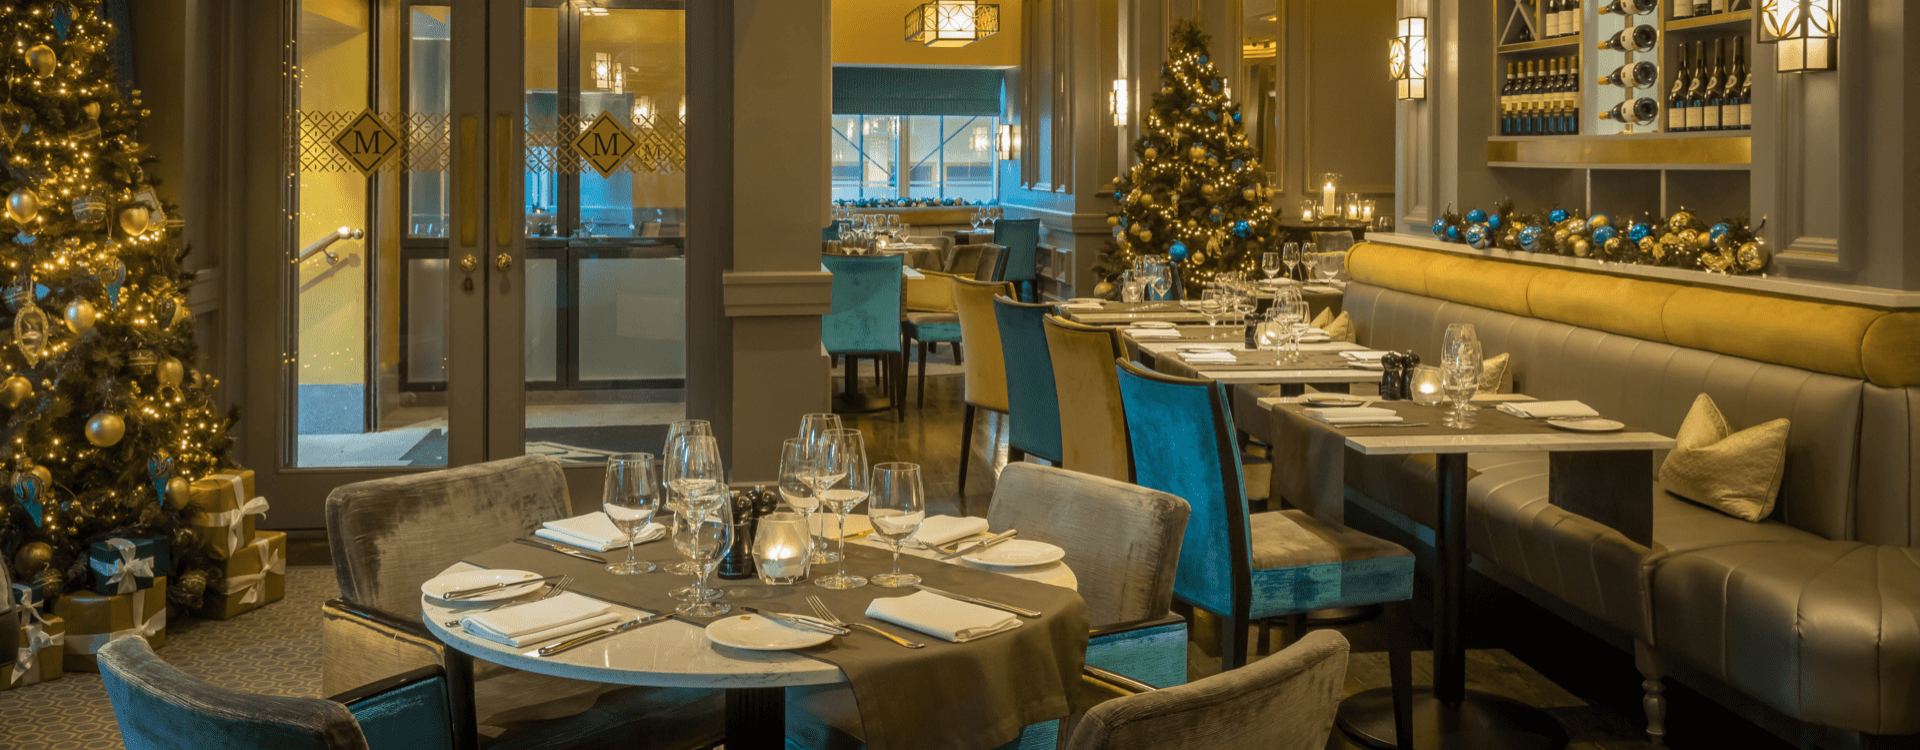 Christmas morelands grill the college green hotel dublin The College Green Hotel